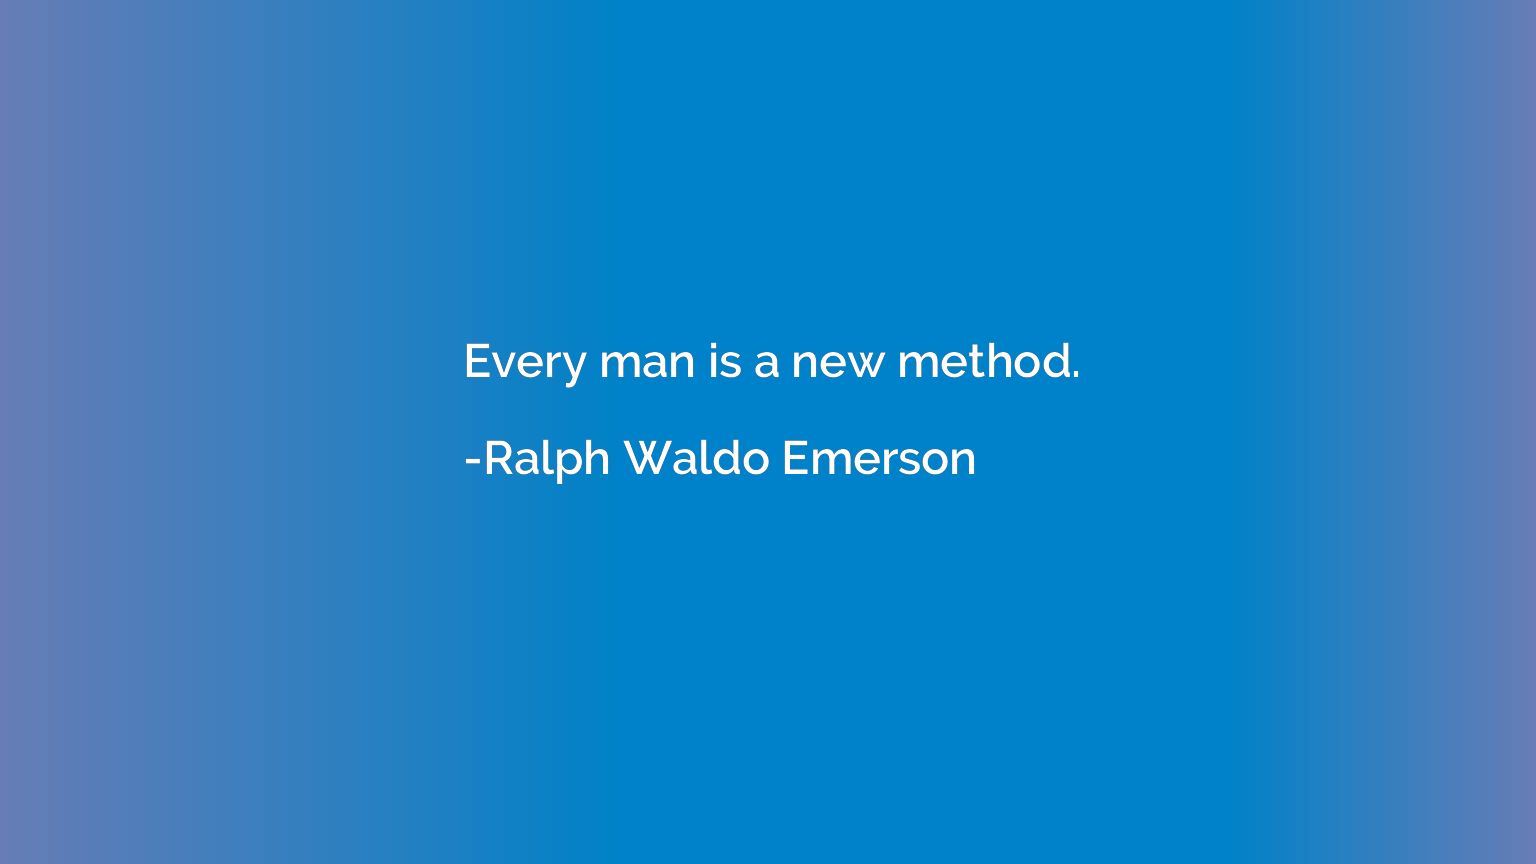 Every man is a new method.